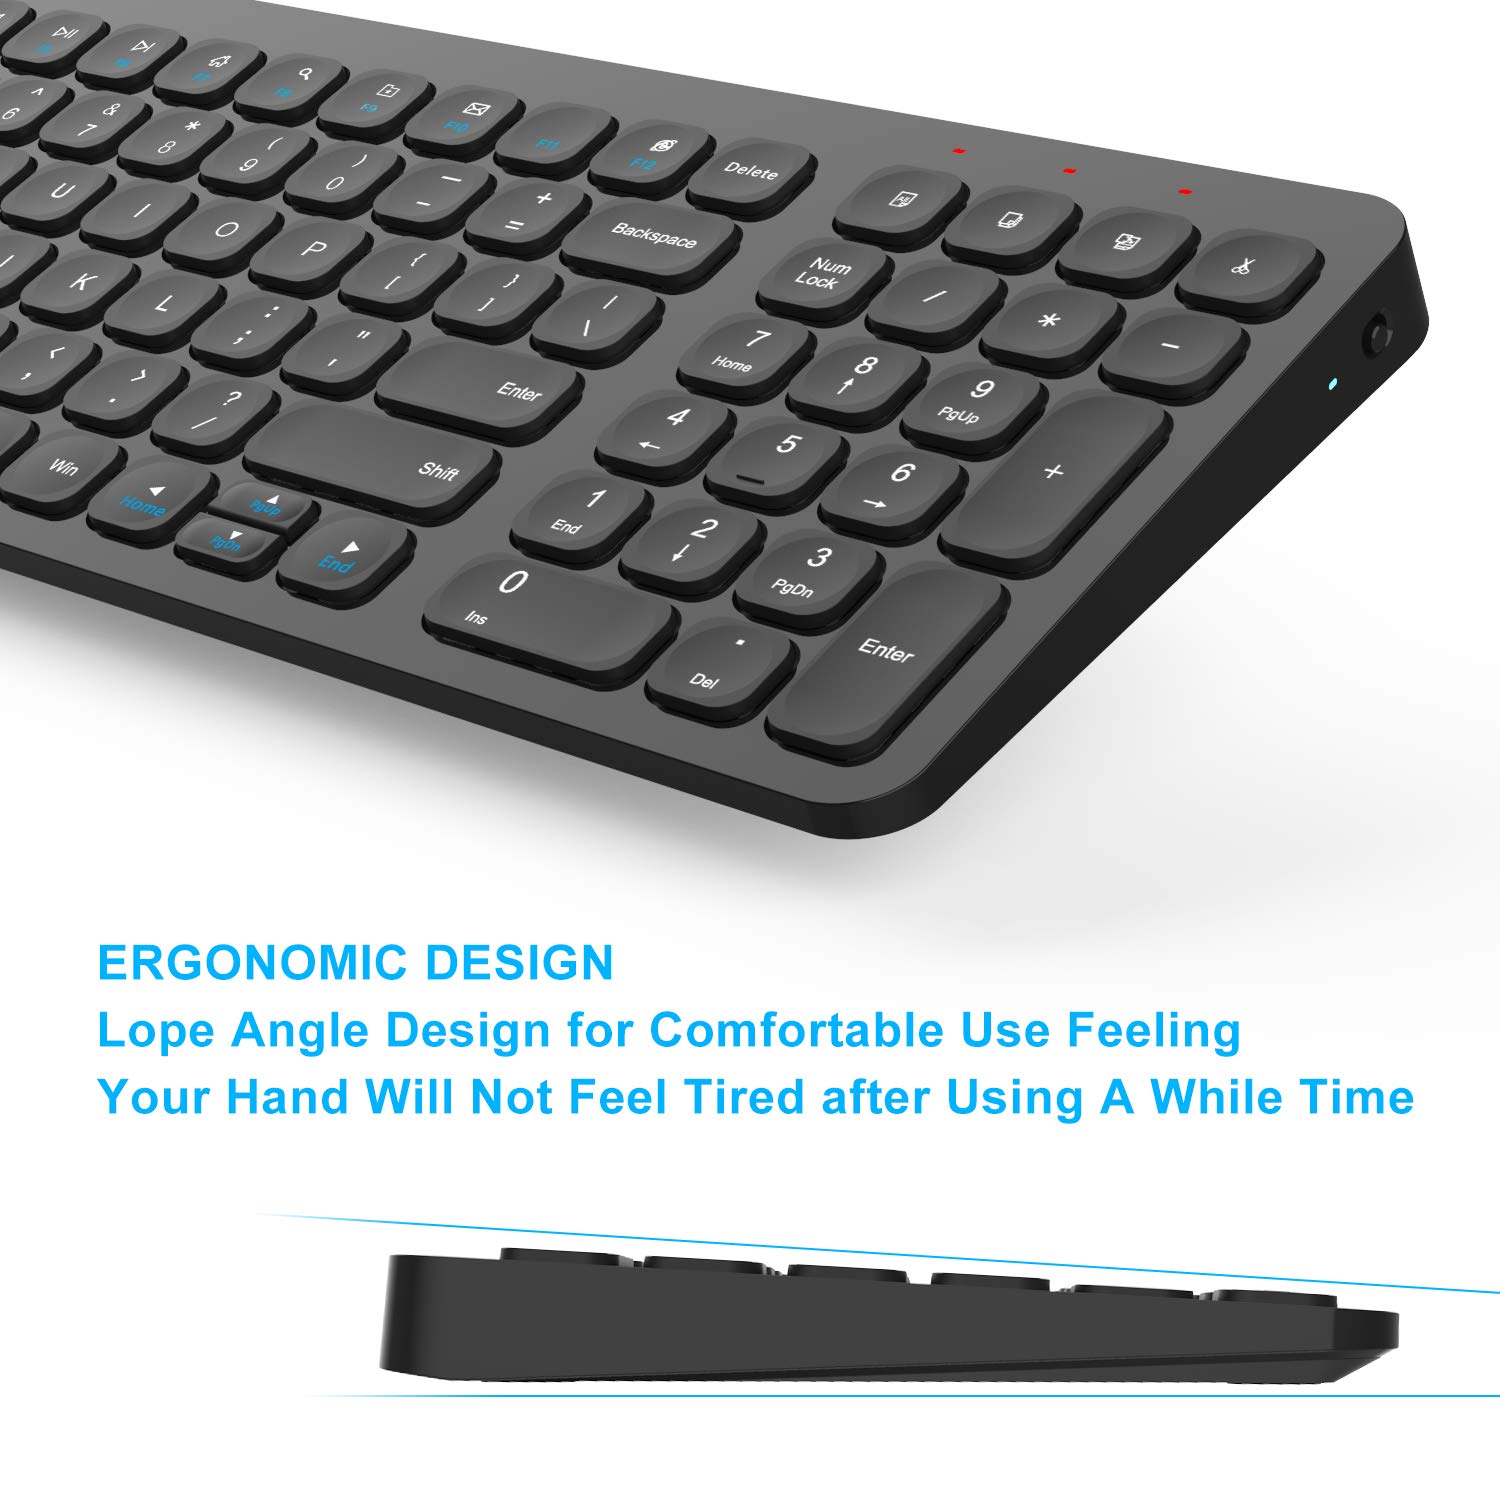 LeadsaiL Wireless Keyboard and Mouse, Wireless Mouse and Keyboard Combo, Cordless USB Computer Keyboard and Mouse Set, Ergonomic, Silent, Compact Slim for Windows Laptop, Apple, iMac, Desktop, PC